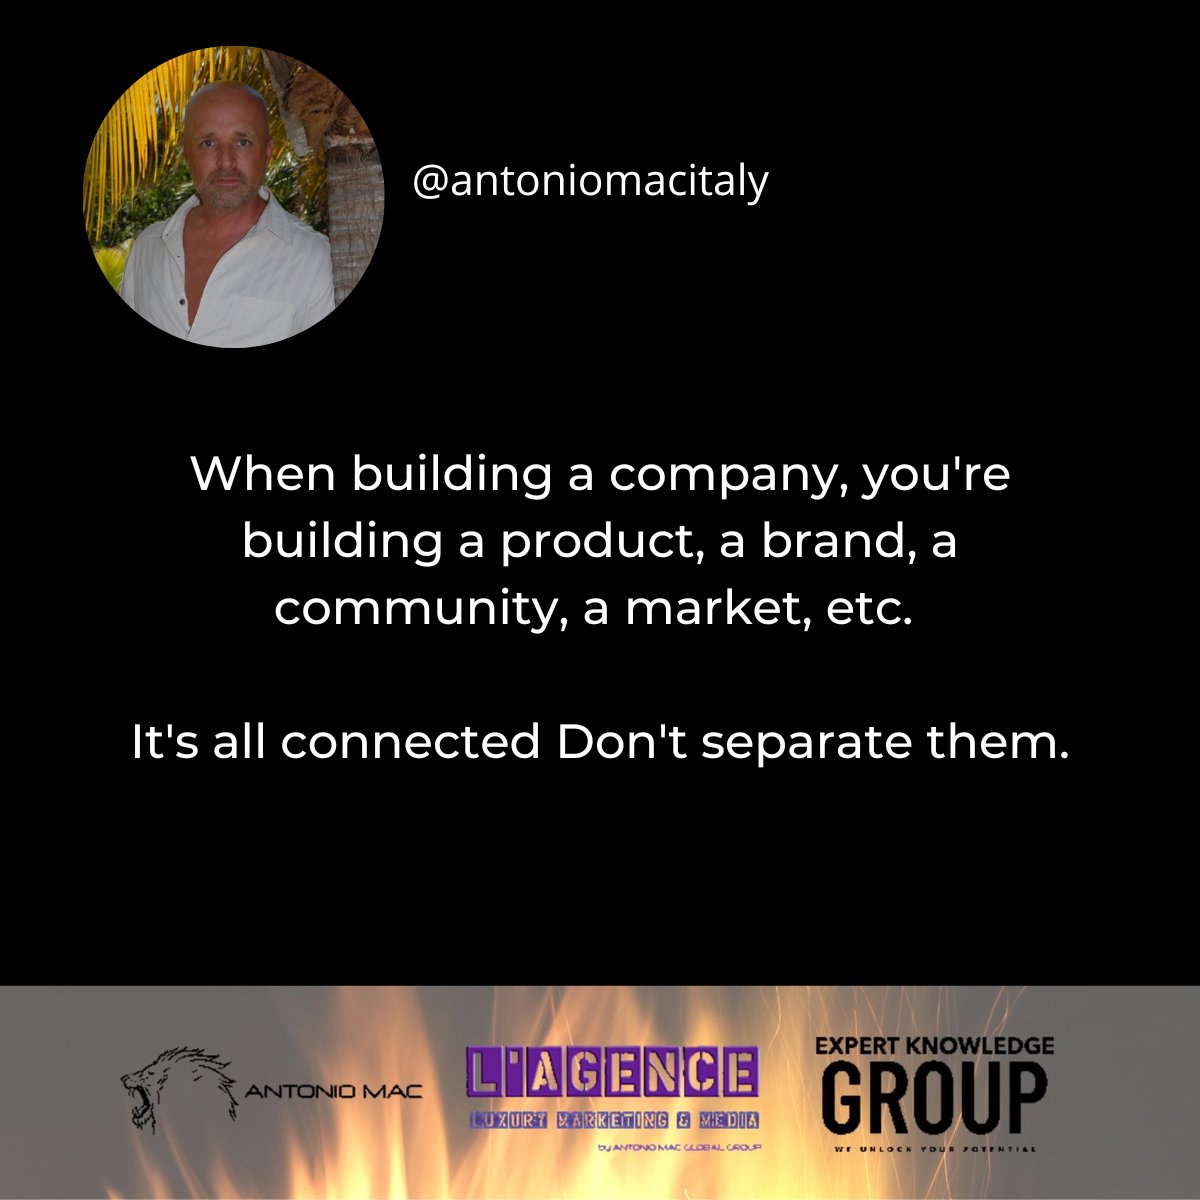 When building a company, you're building a product, a brand, a community, a market, etc.
It's all connected Don't separate them.

#brand #building #community #branding #buildingabusiness #morevalue #moreservice #smallbusinessstrategy #businessbranding